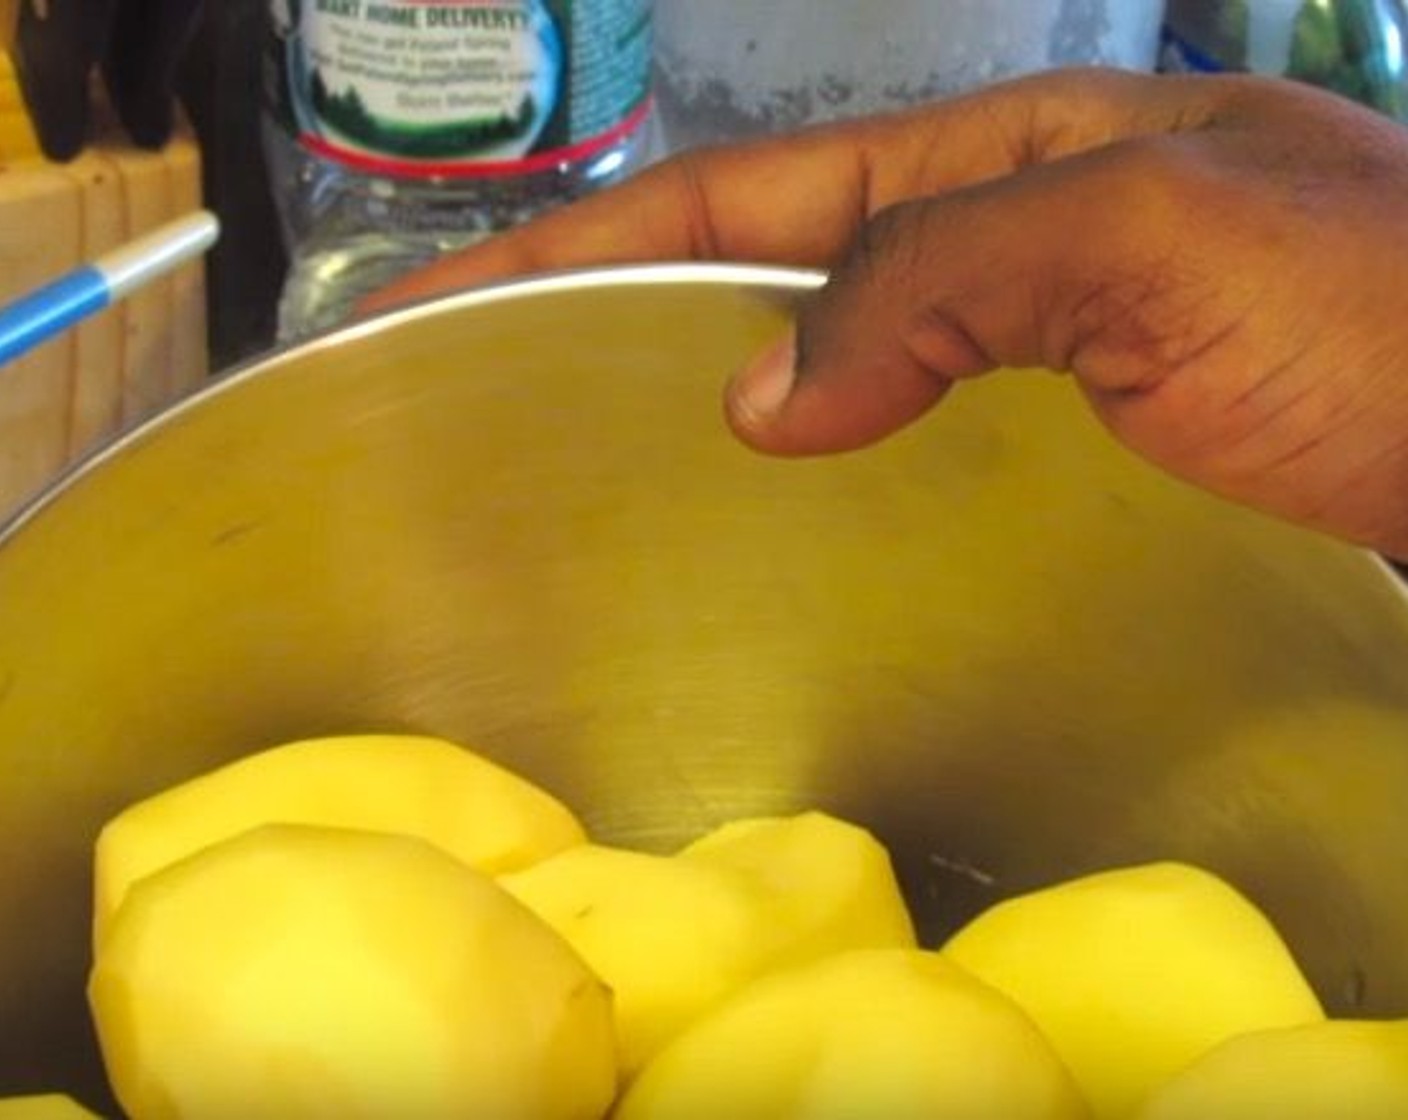 step 1 As you peel the Russet Potatoes (5 lb), place them in a mixture of Water (10 cups) and Orange (1) to keep from browning.